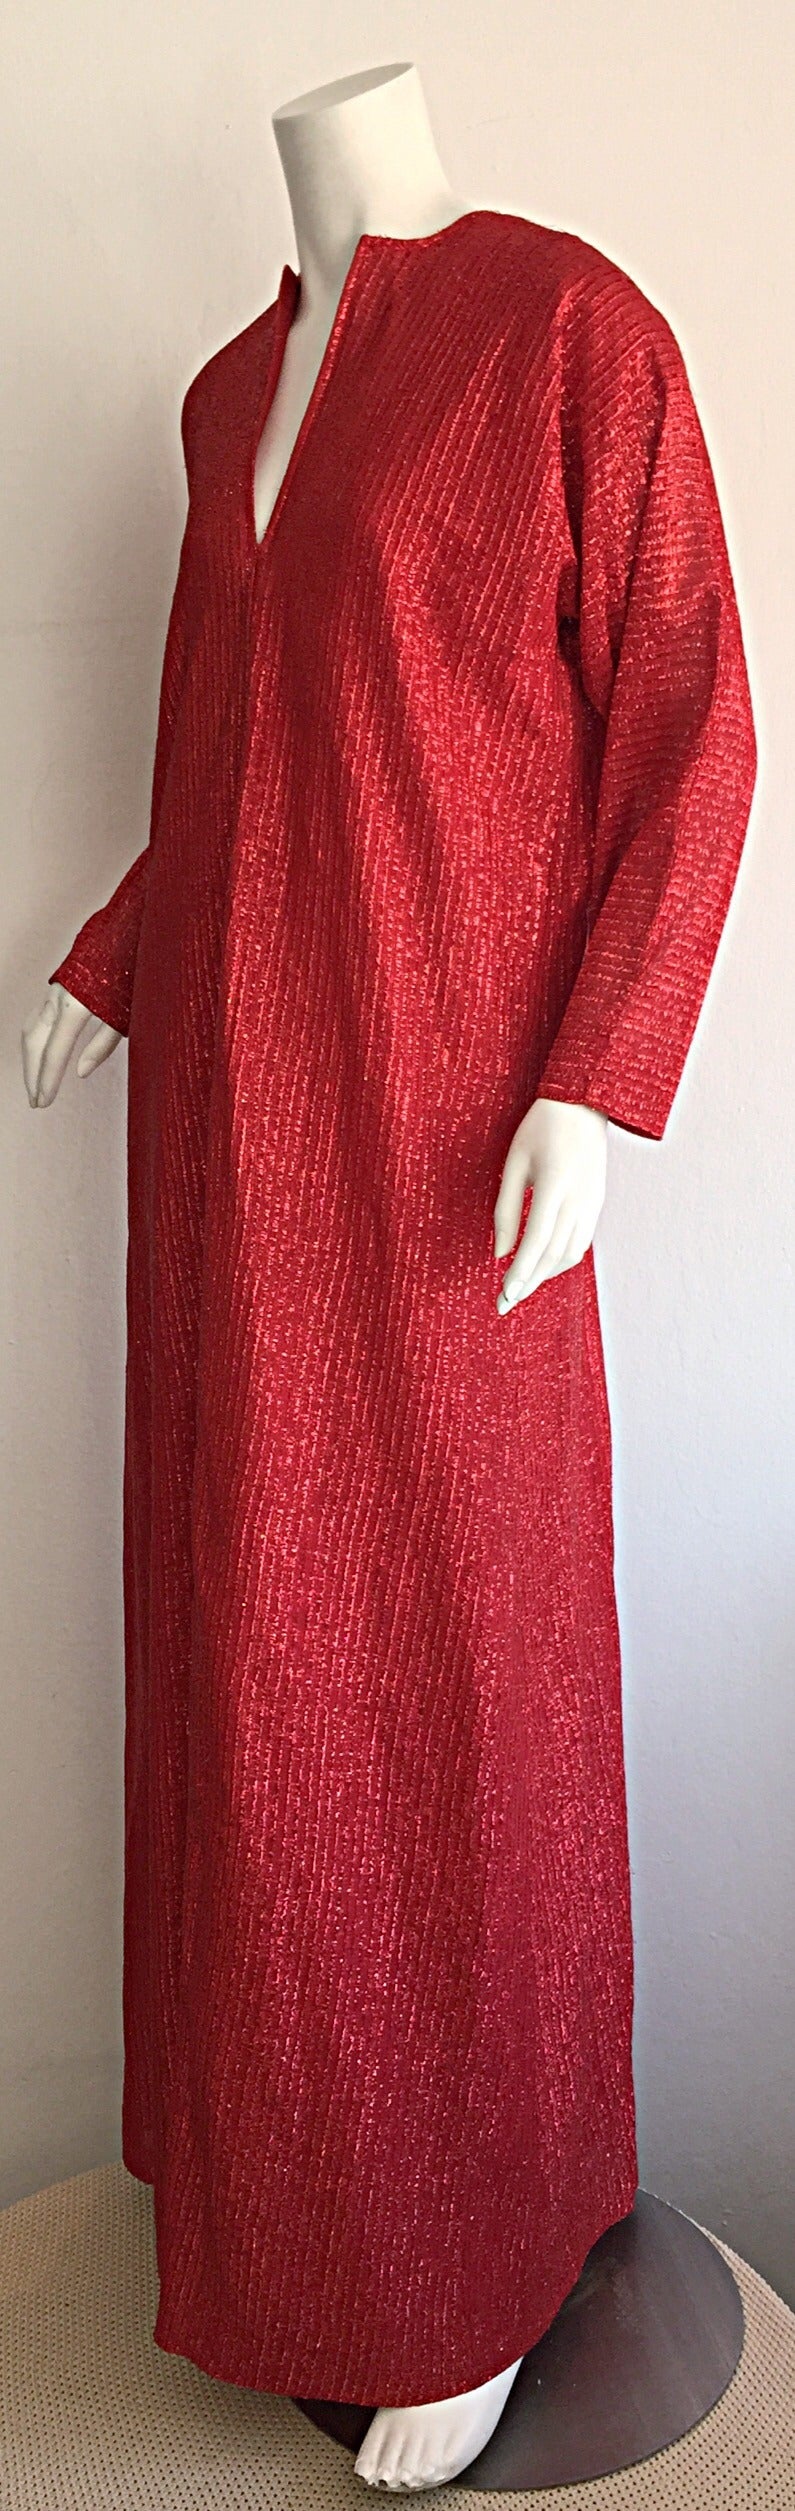 Stunning vintage Halston red metallic caftan/dress!!! Signature Halston style. Looks great alone, or belted. Pictured vintage YSL Russian belt is also available in my 1stDibs Shop! Looks great from day to night. Perfect over a swimsuit, or great